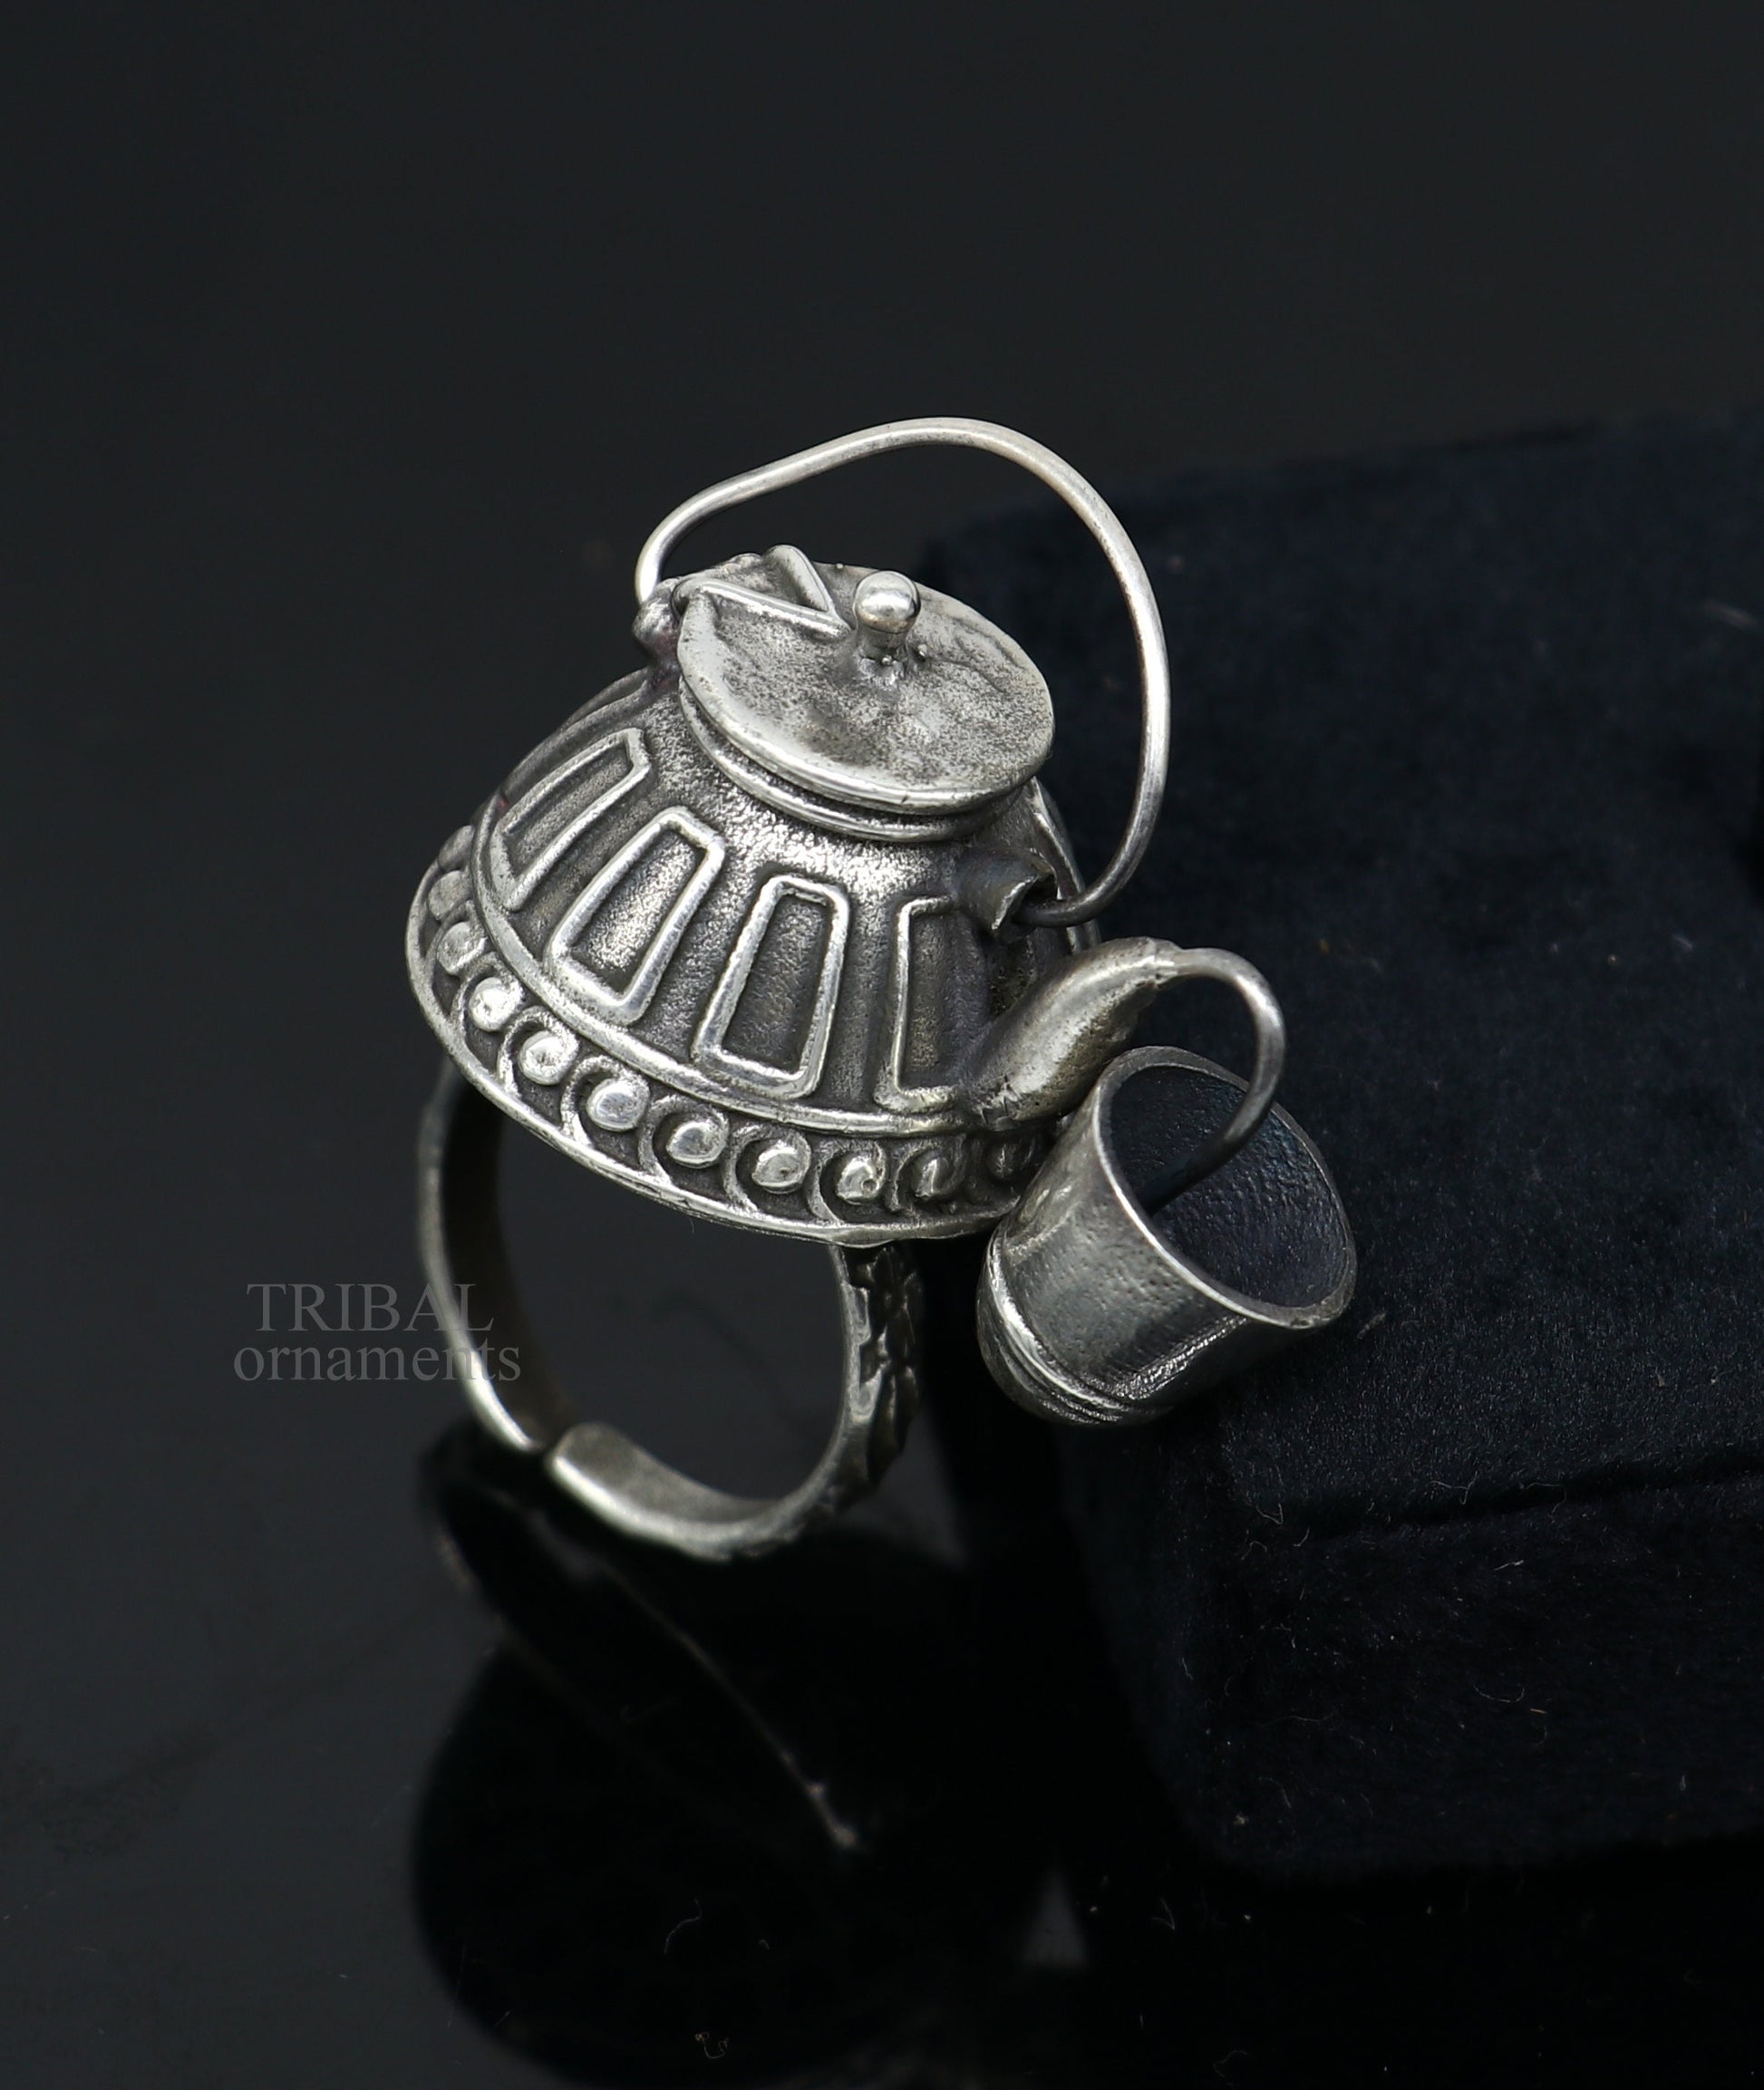 925 sterling silver Traditional vintage tea pot design handmade stylish ring women's tribal charm ring brides jewelry India sr329 - TRIBAL ORNAMENTS